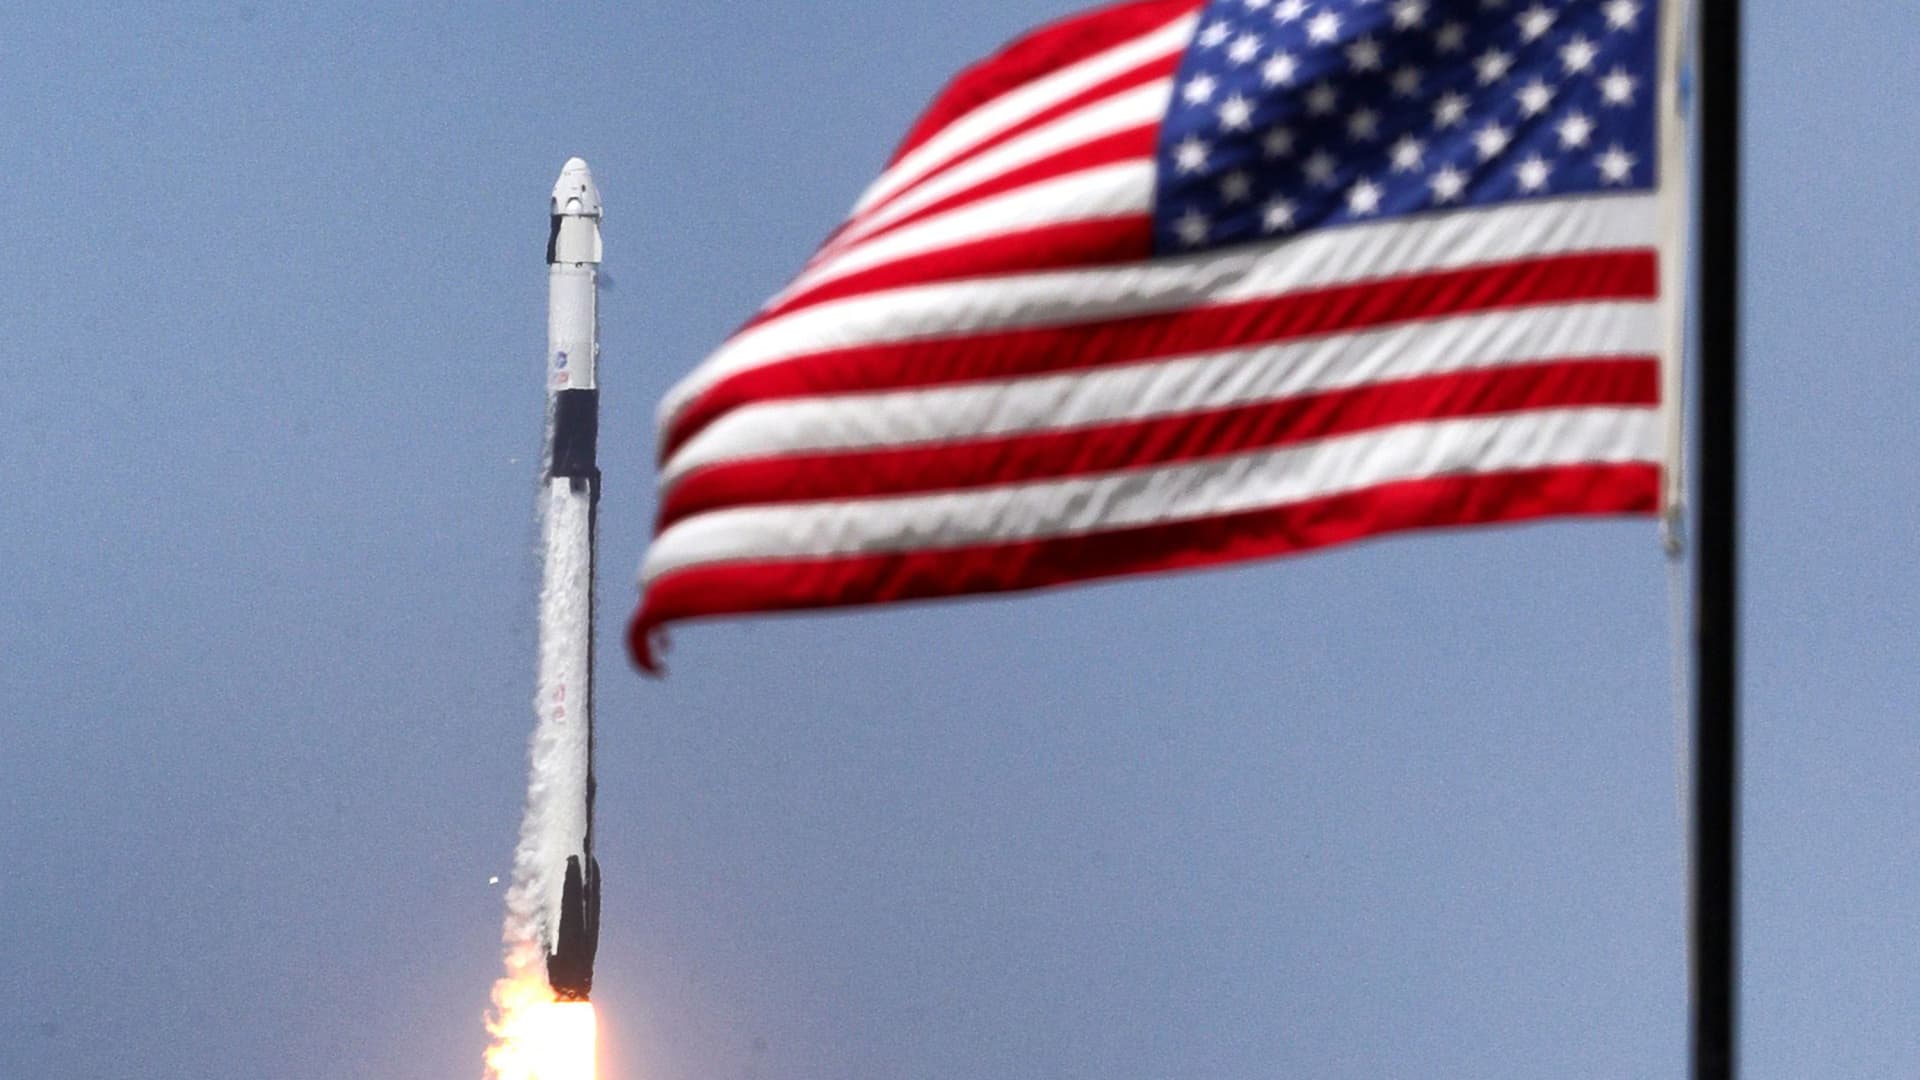 NASA awards SpaceX $1.4 billion in contracts for 5 more astronaut missions